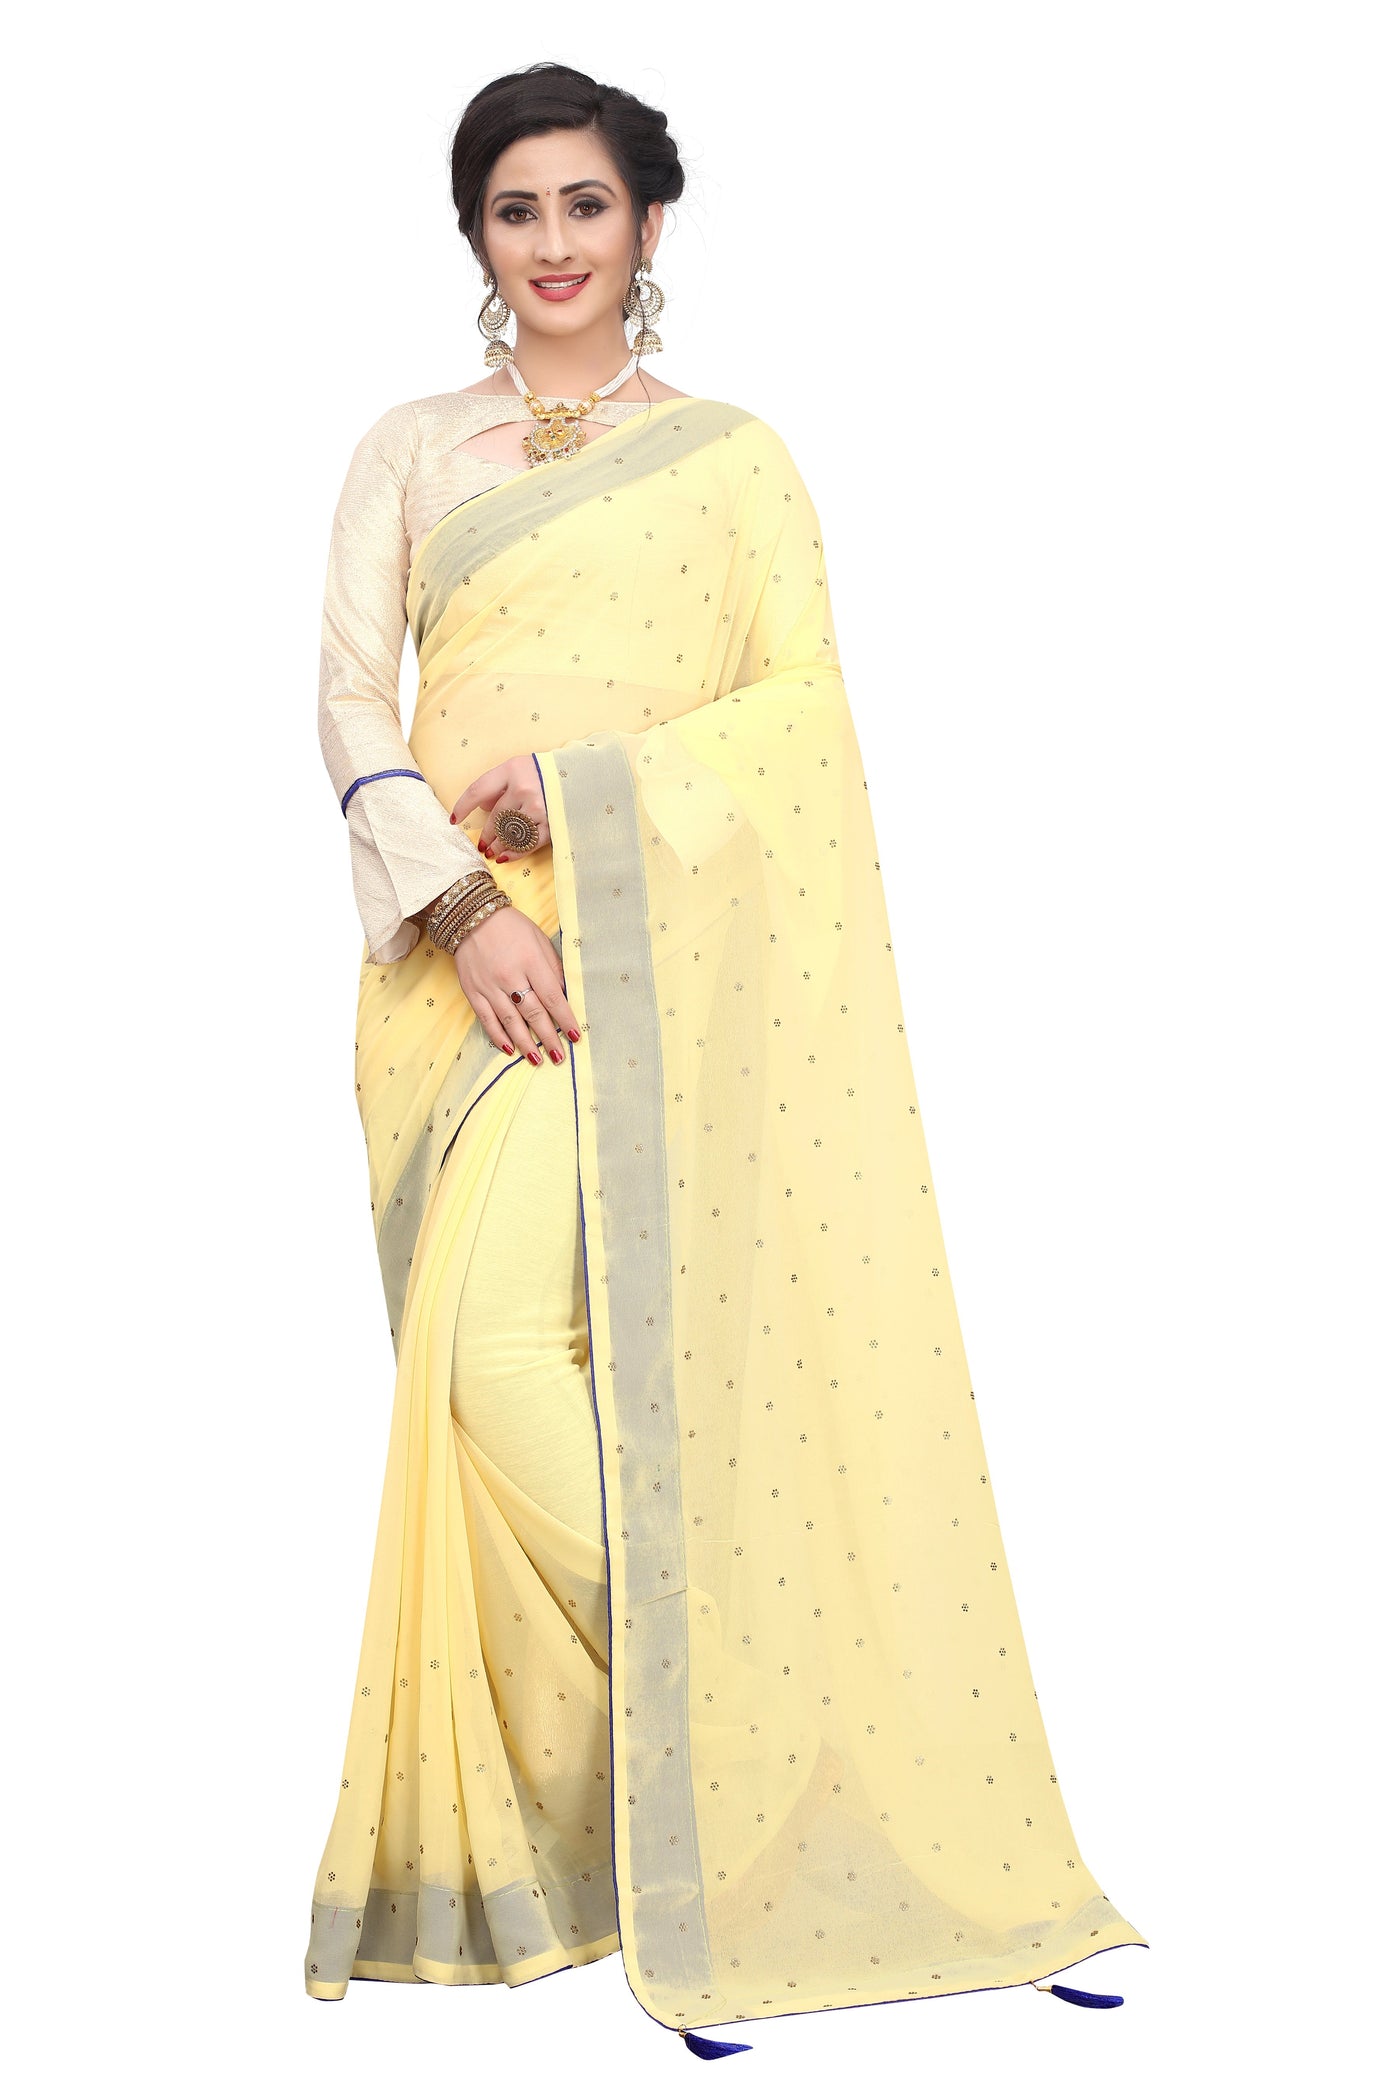 Georgette Satin Yellow Saree With Blouse